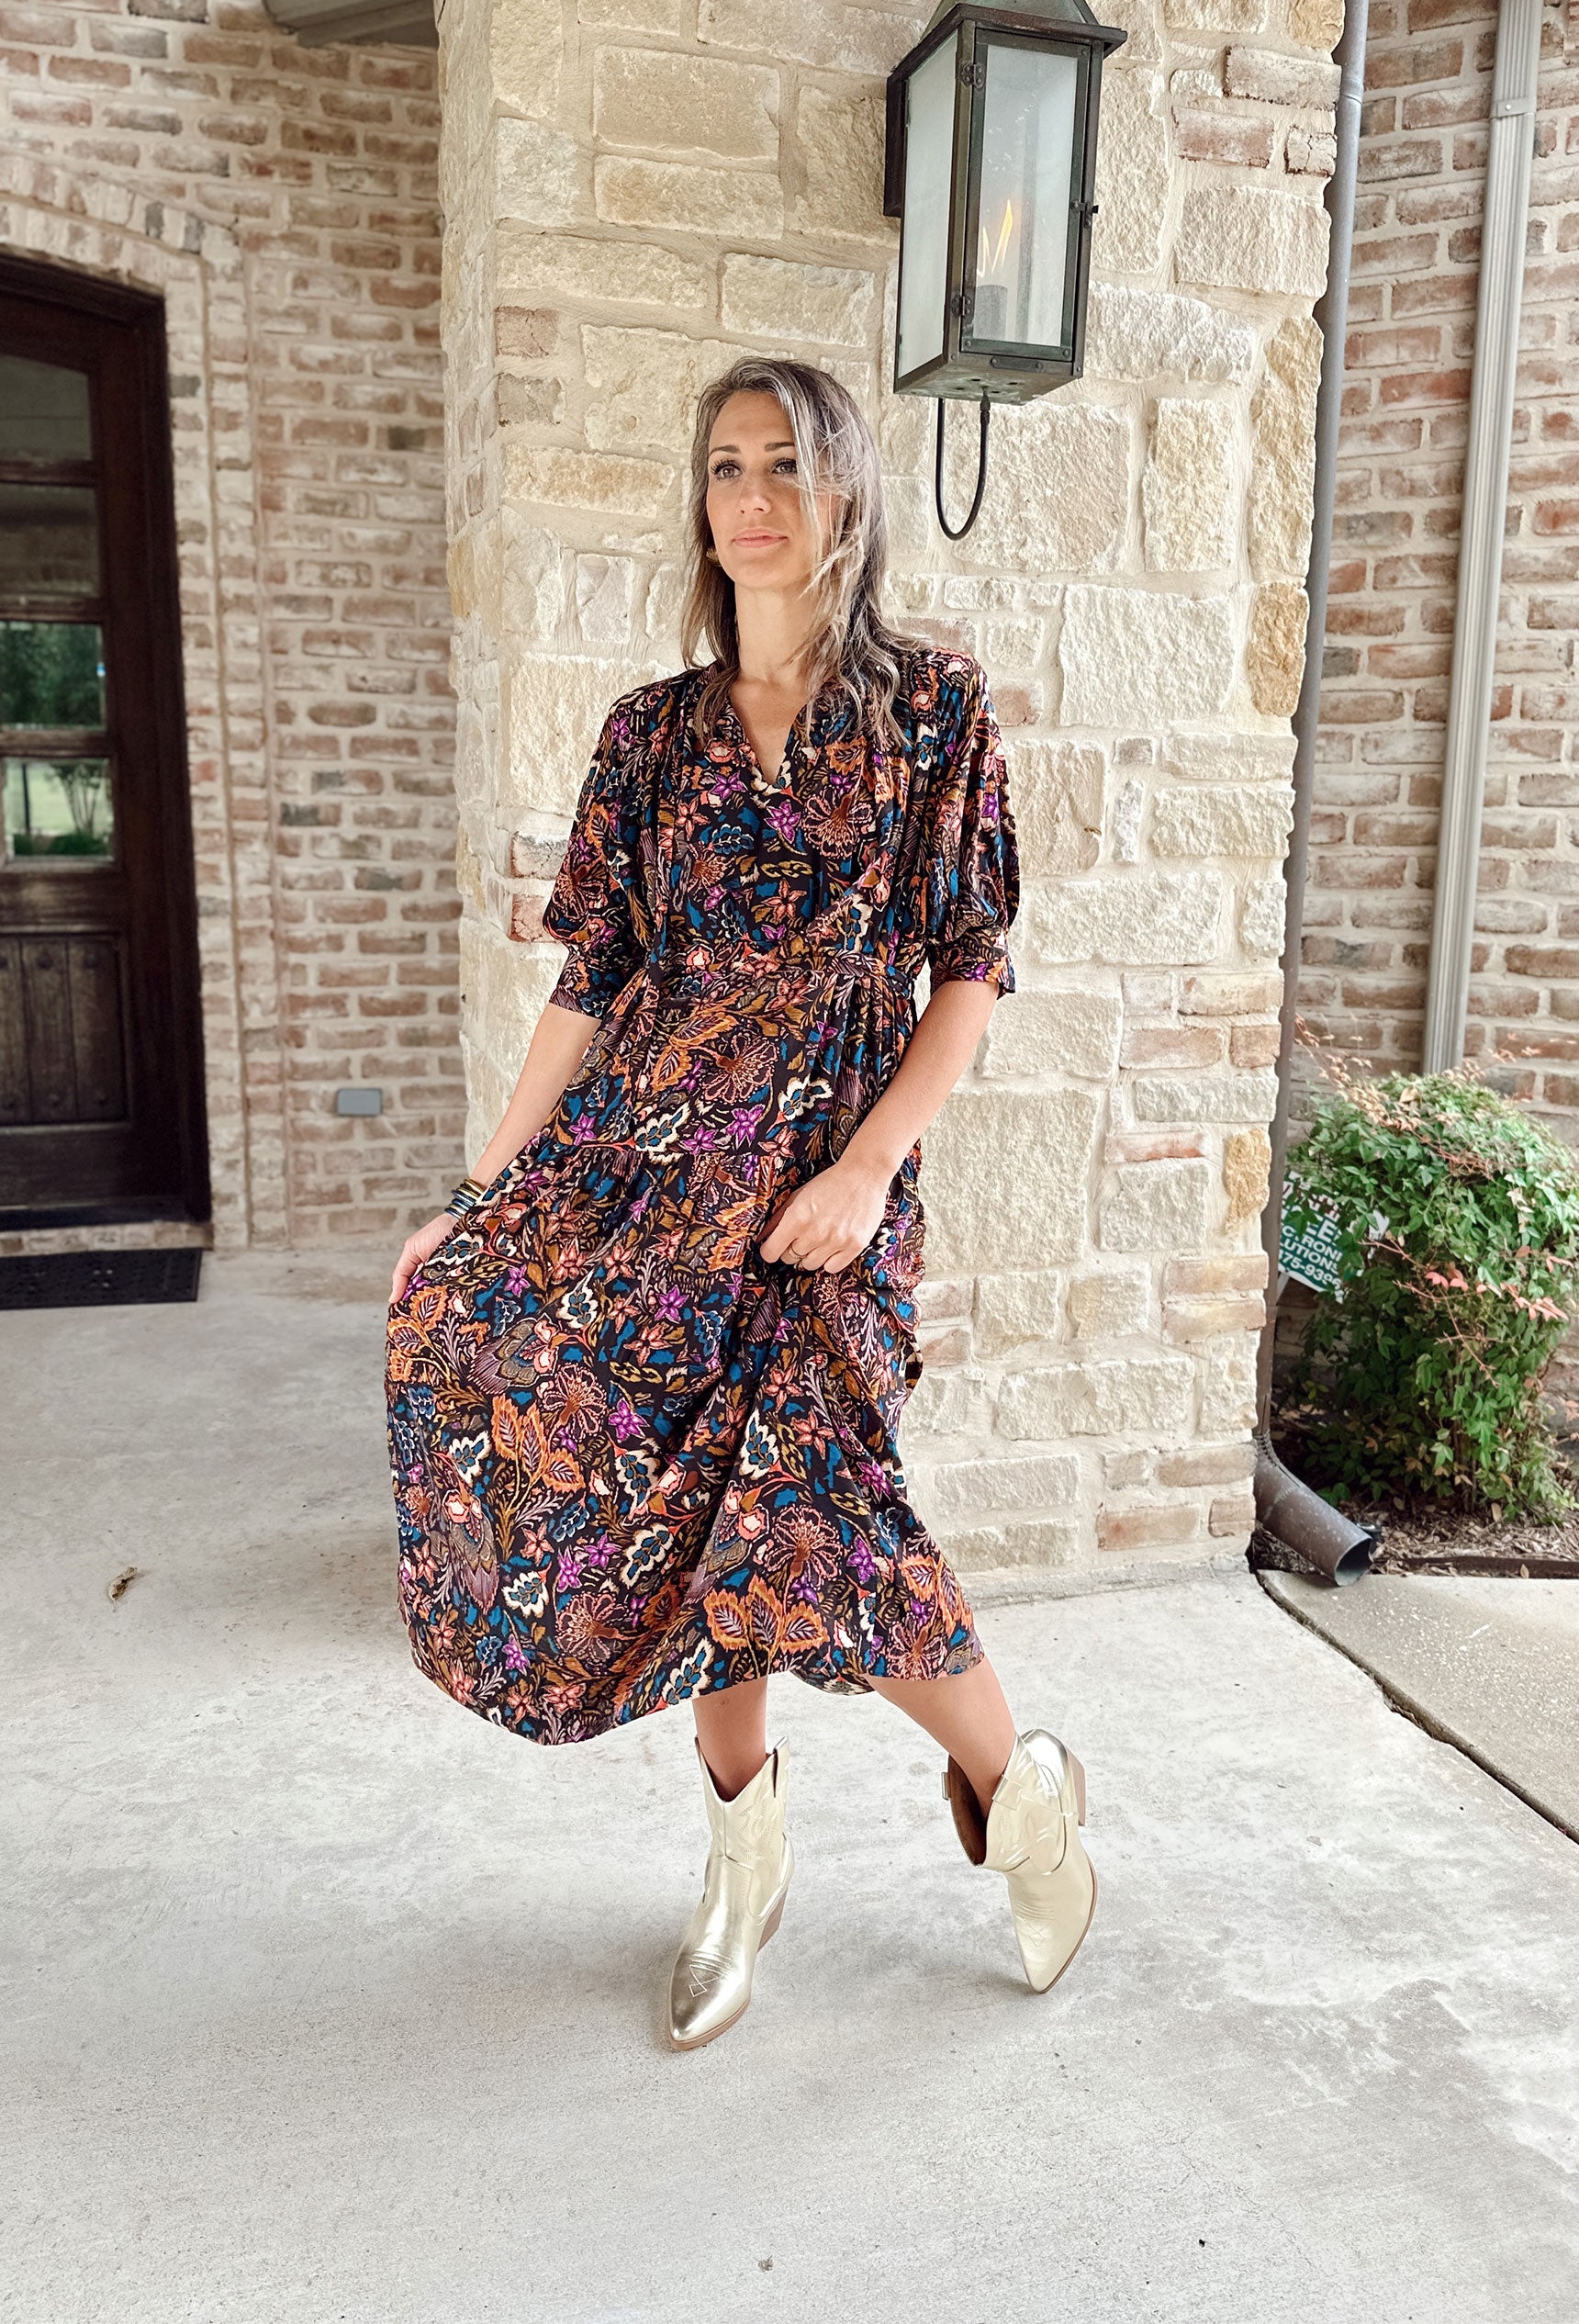 Begin Again Floral Midi Dress, black midi dress with floral and leaf print in orange, teal, cream, and orchid